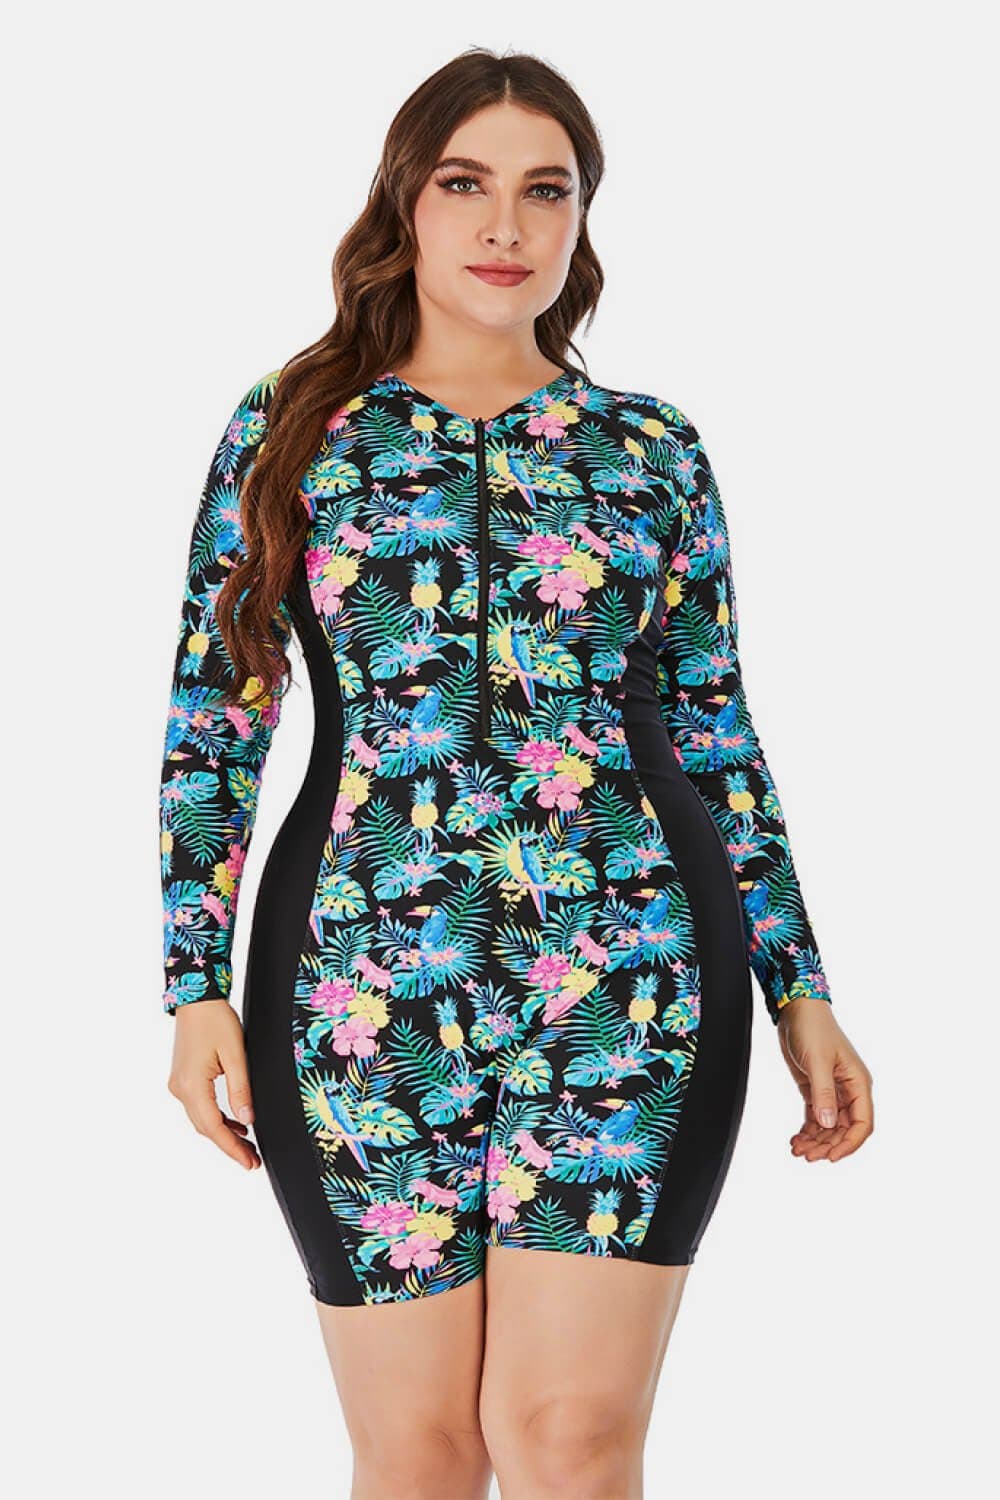 Plus Size Floral Zip Up Long Sleeve Short Wetsuit - Runway Frenzy